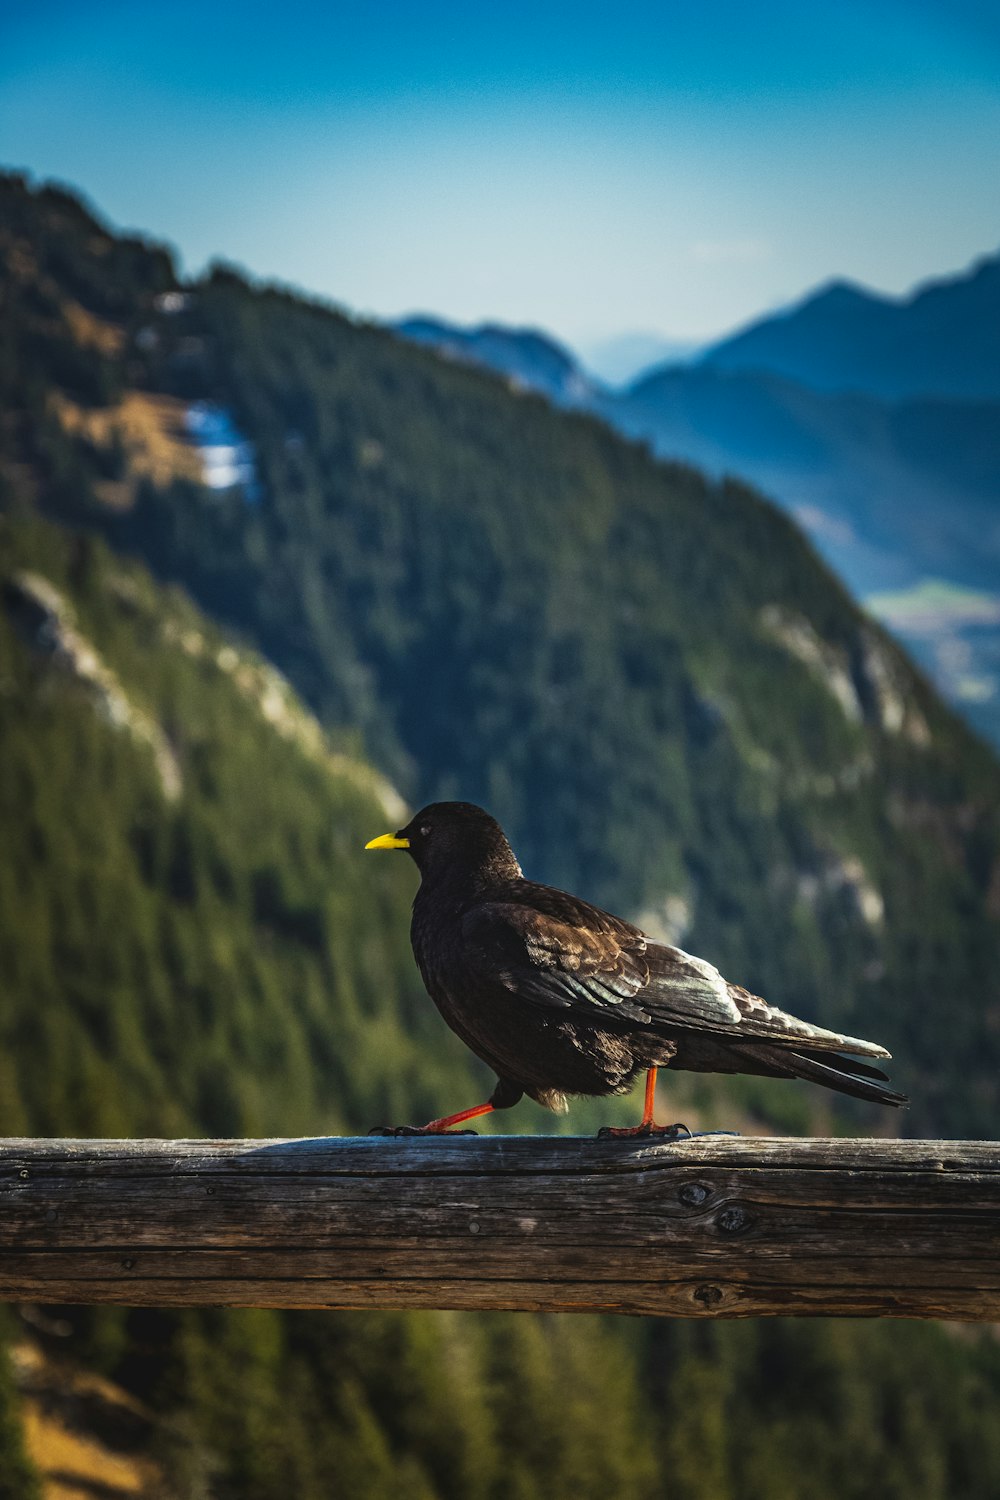 a bird is perched on a wooden railing